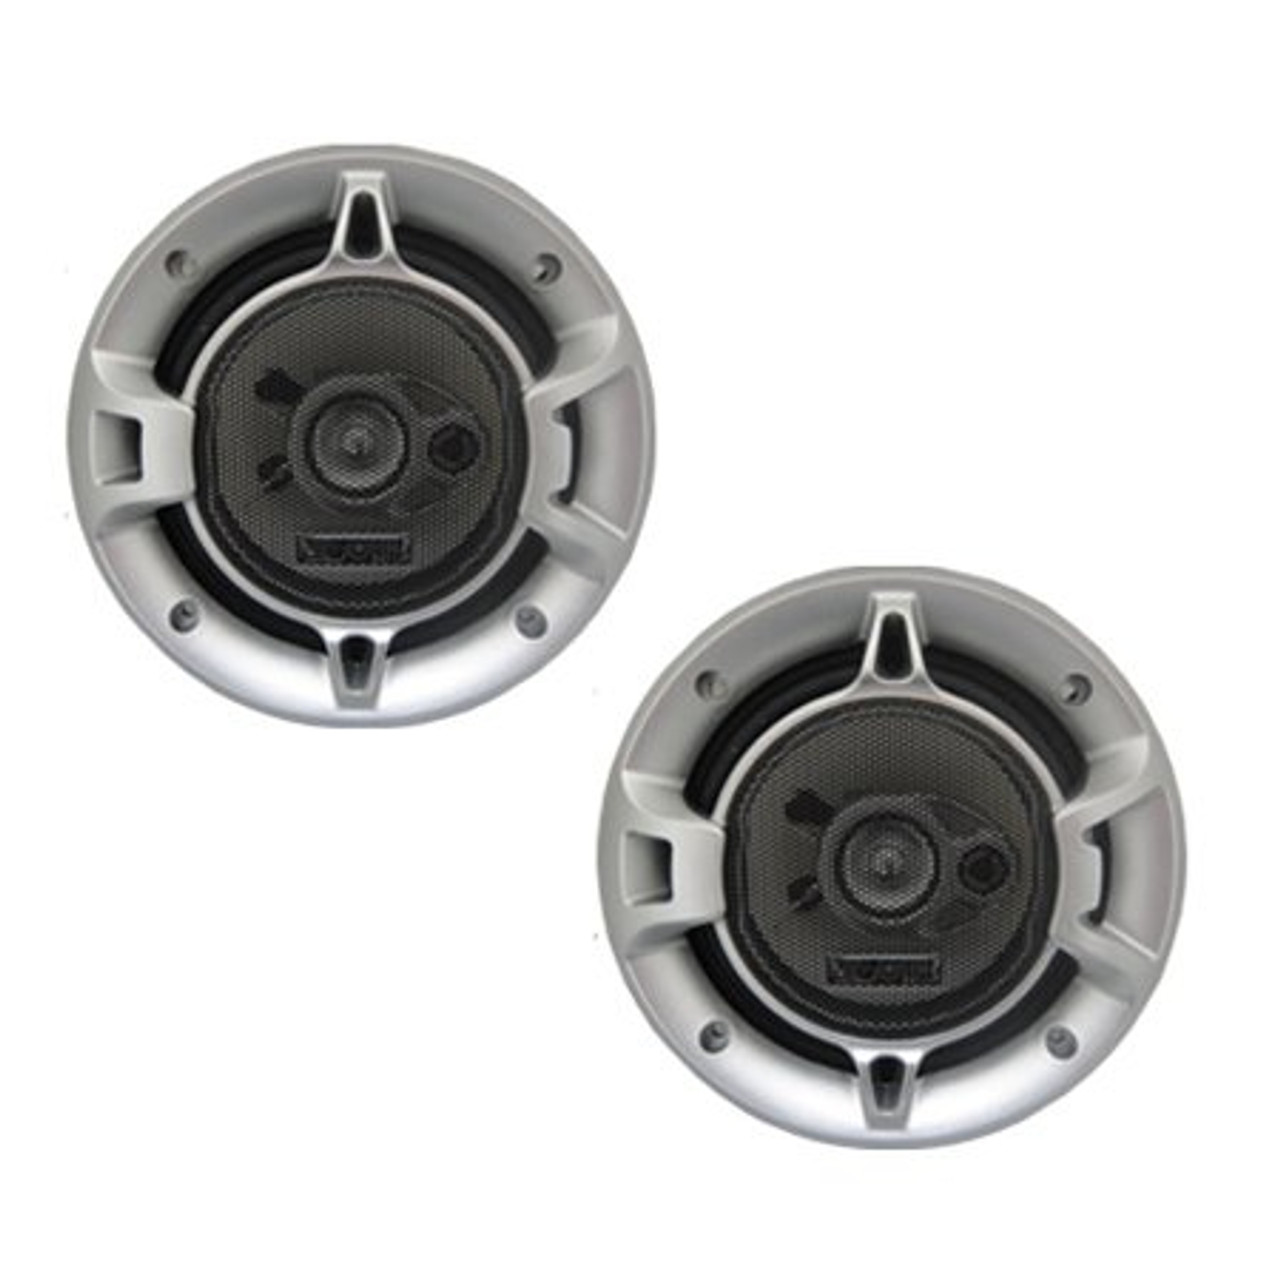 Absolute BLS-5253 Blast Series 5.25 Inches 3 Way Car Speakers 560 Watts Max Power